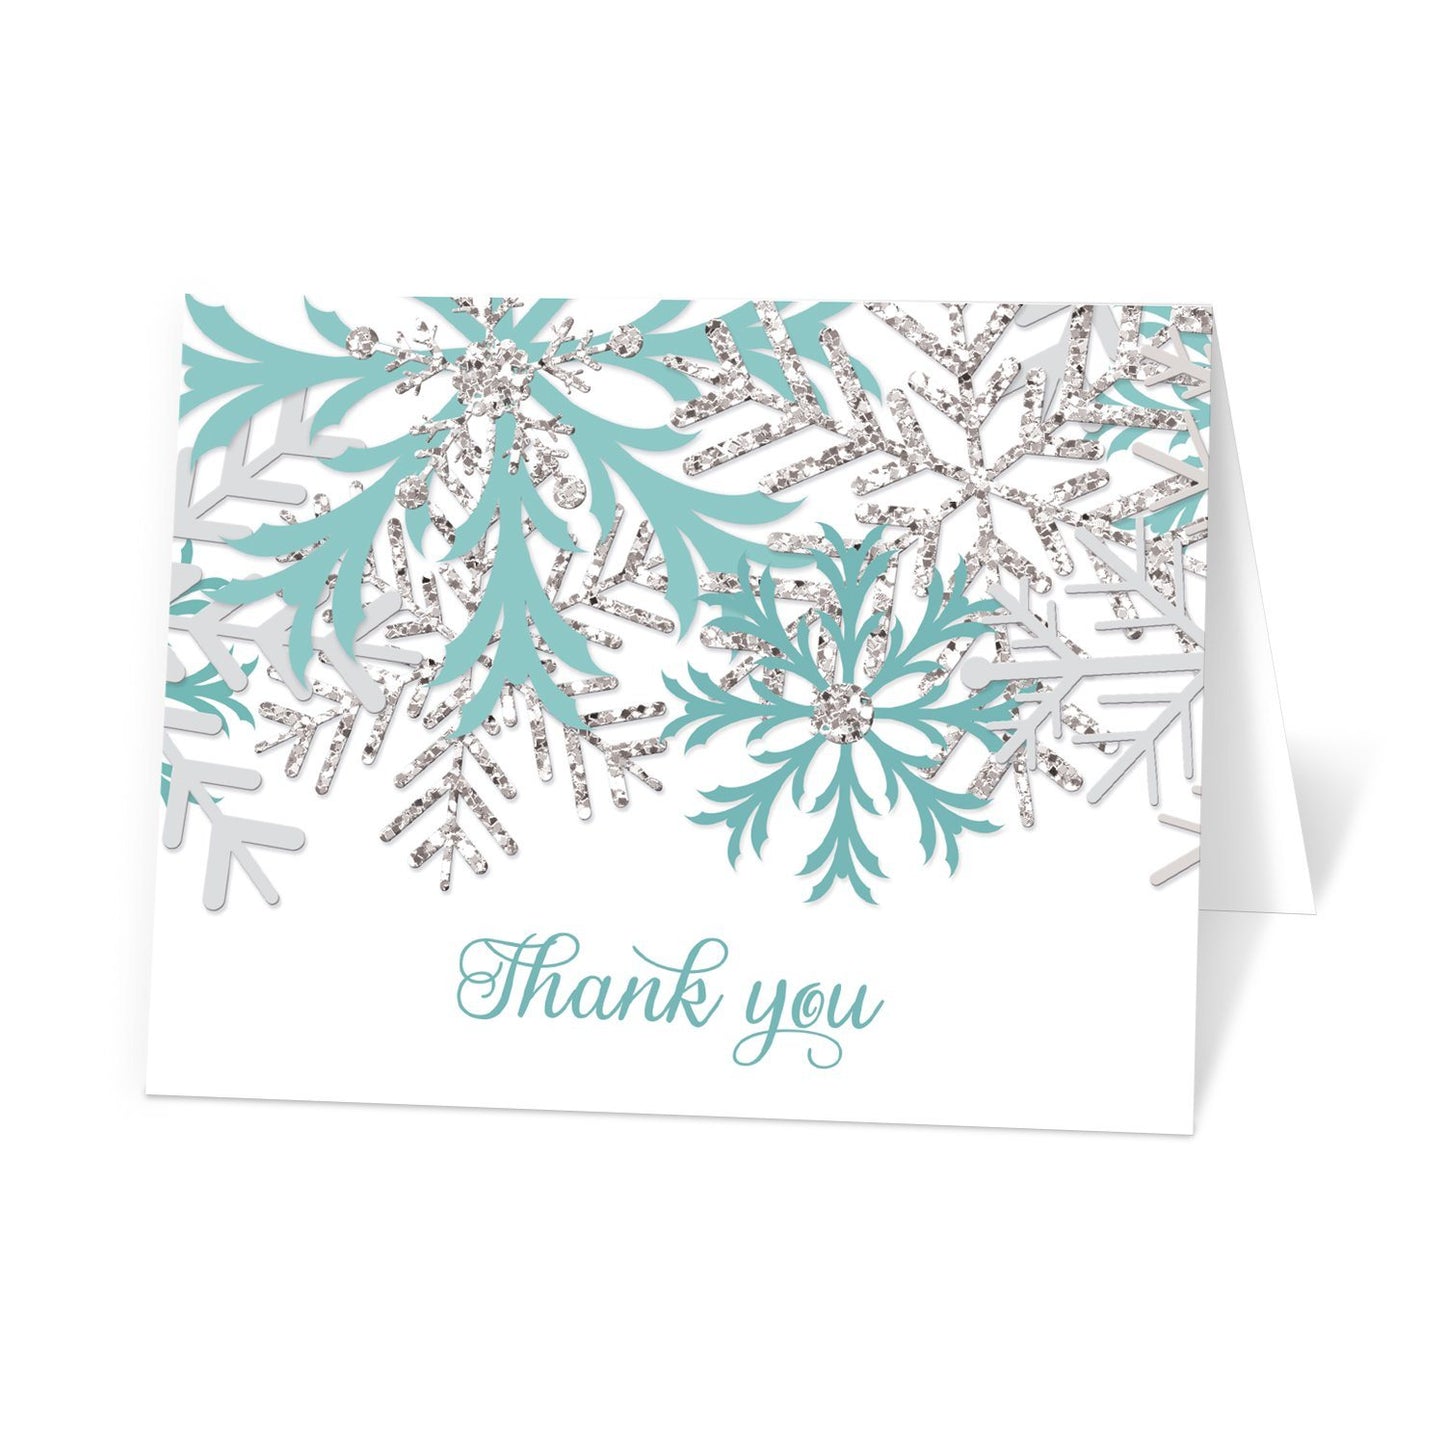 Winter Teal Silver Snowflake Thank You Cards at Artistically Invited. Winter teal silver snowflake thank you cards with teal and silver-colored glitter-illustrated snowflakes over a white background and 'Thank you' printed in a whimsical teal script font.